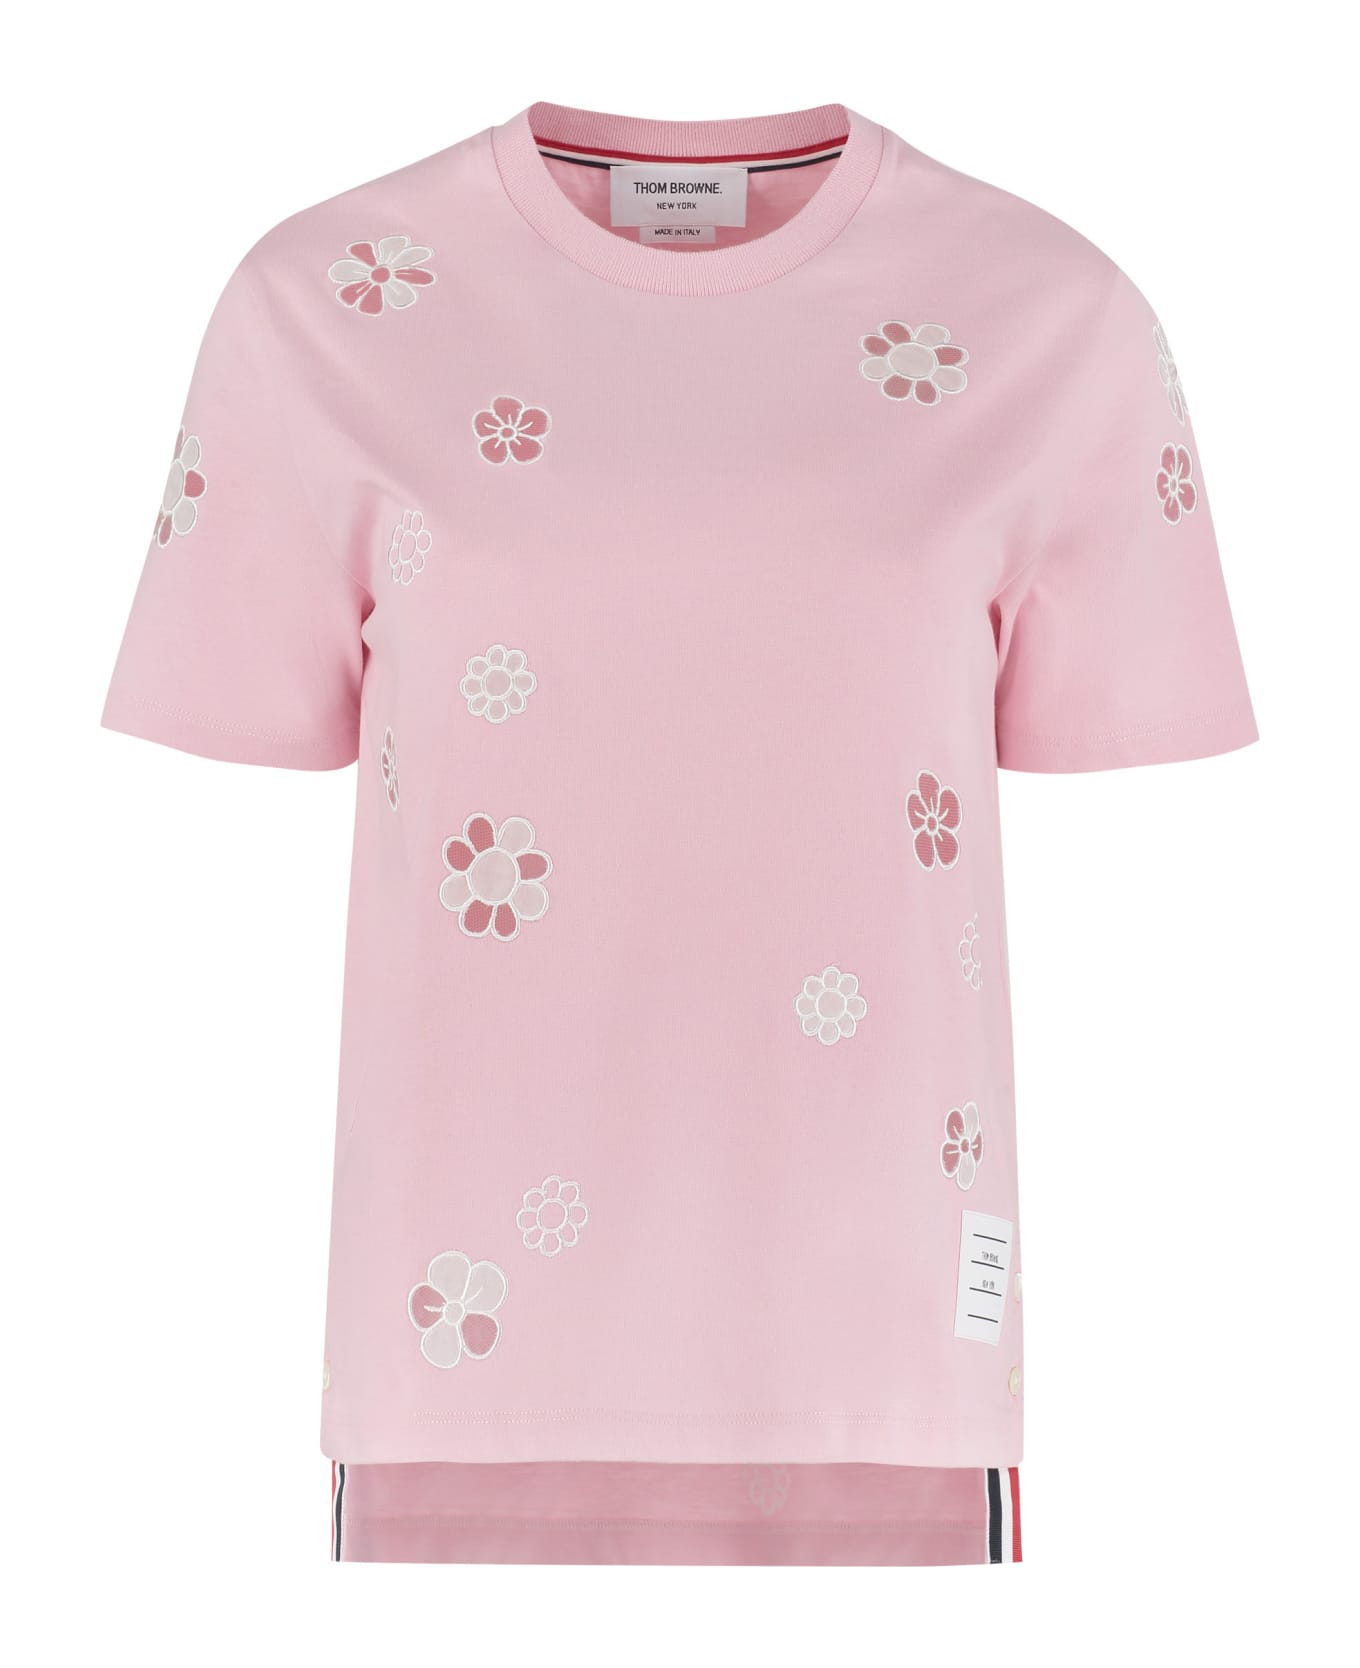 Thom Browne Embroidered Cotton T-shirt - Pink Tシャツ